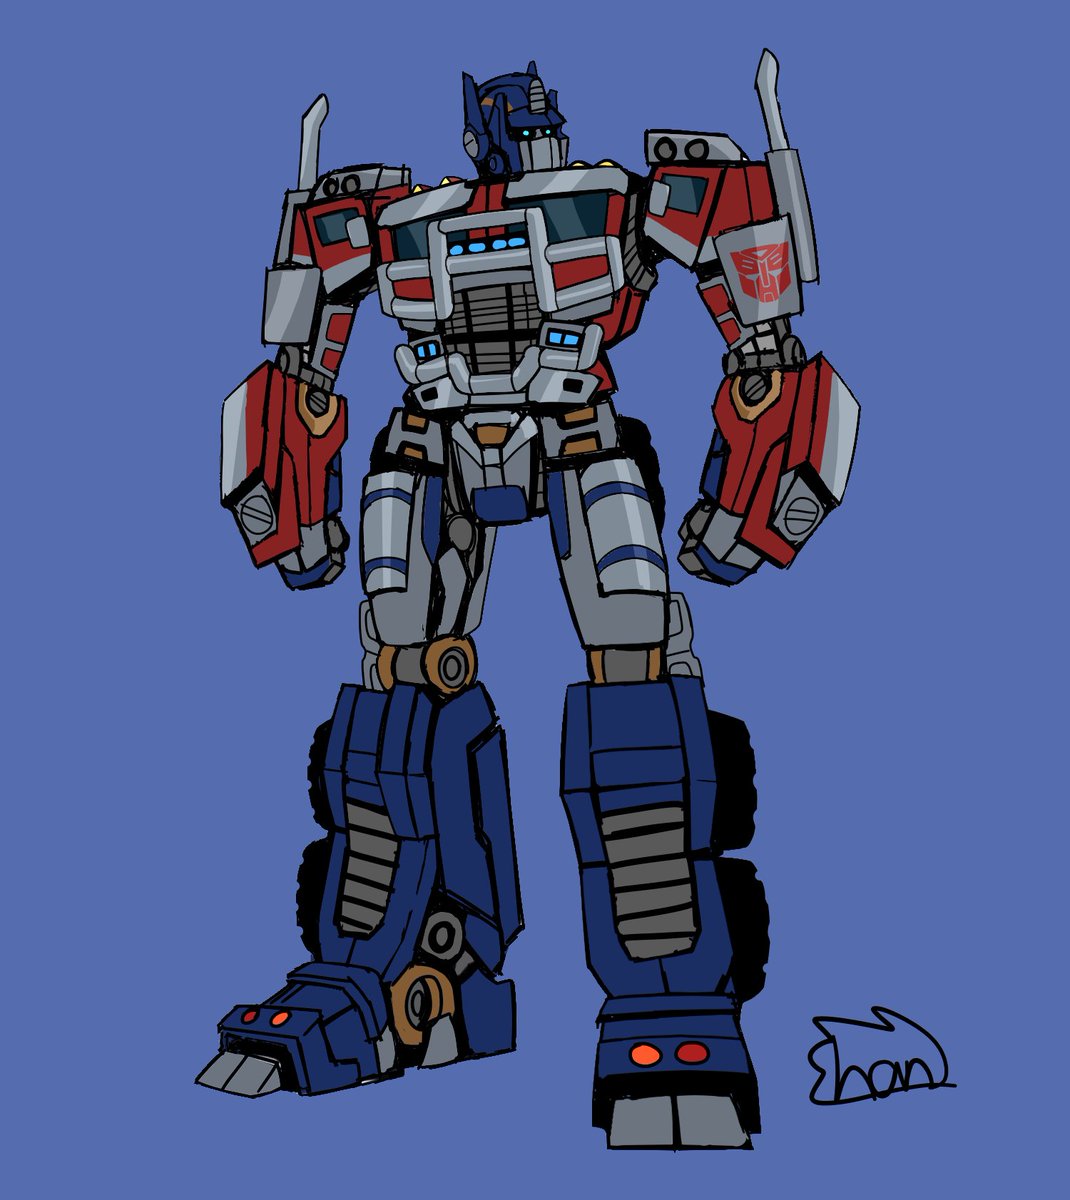 Optimus Prime redesign: ROTB edition

#Transformers #RiseOfTheBeasts #Autobots #OptimusPrime #Rotb